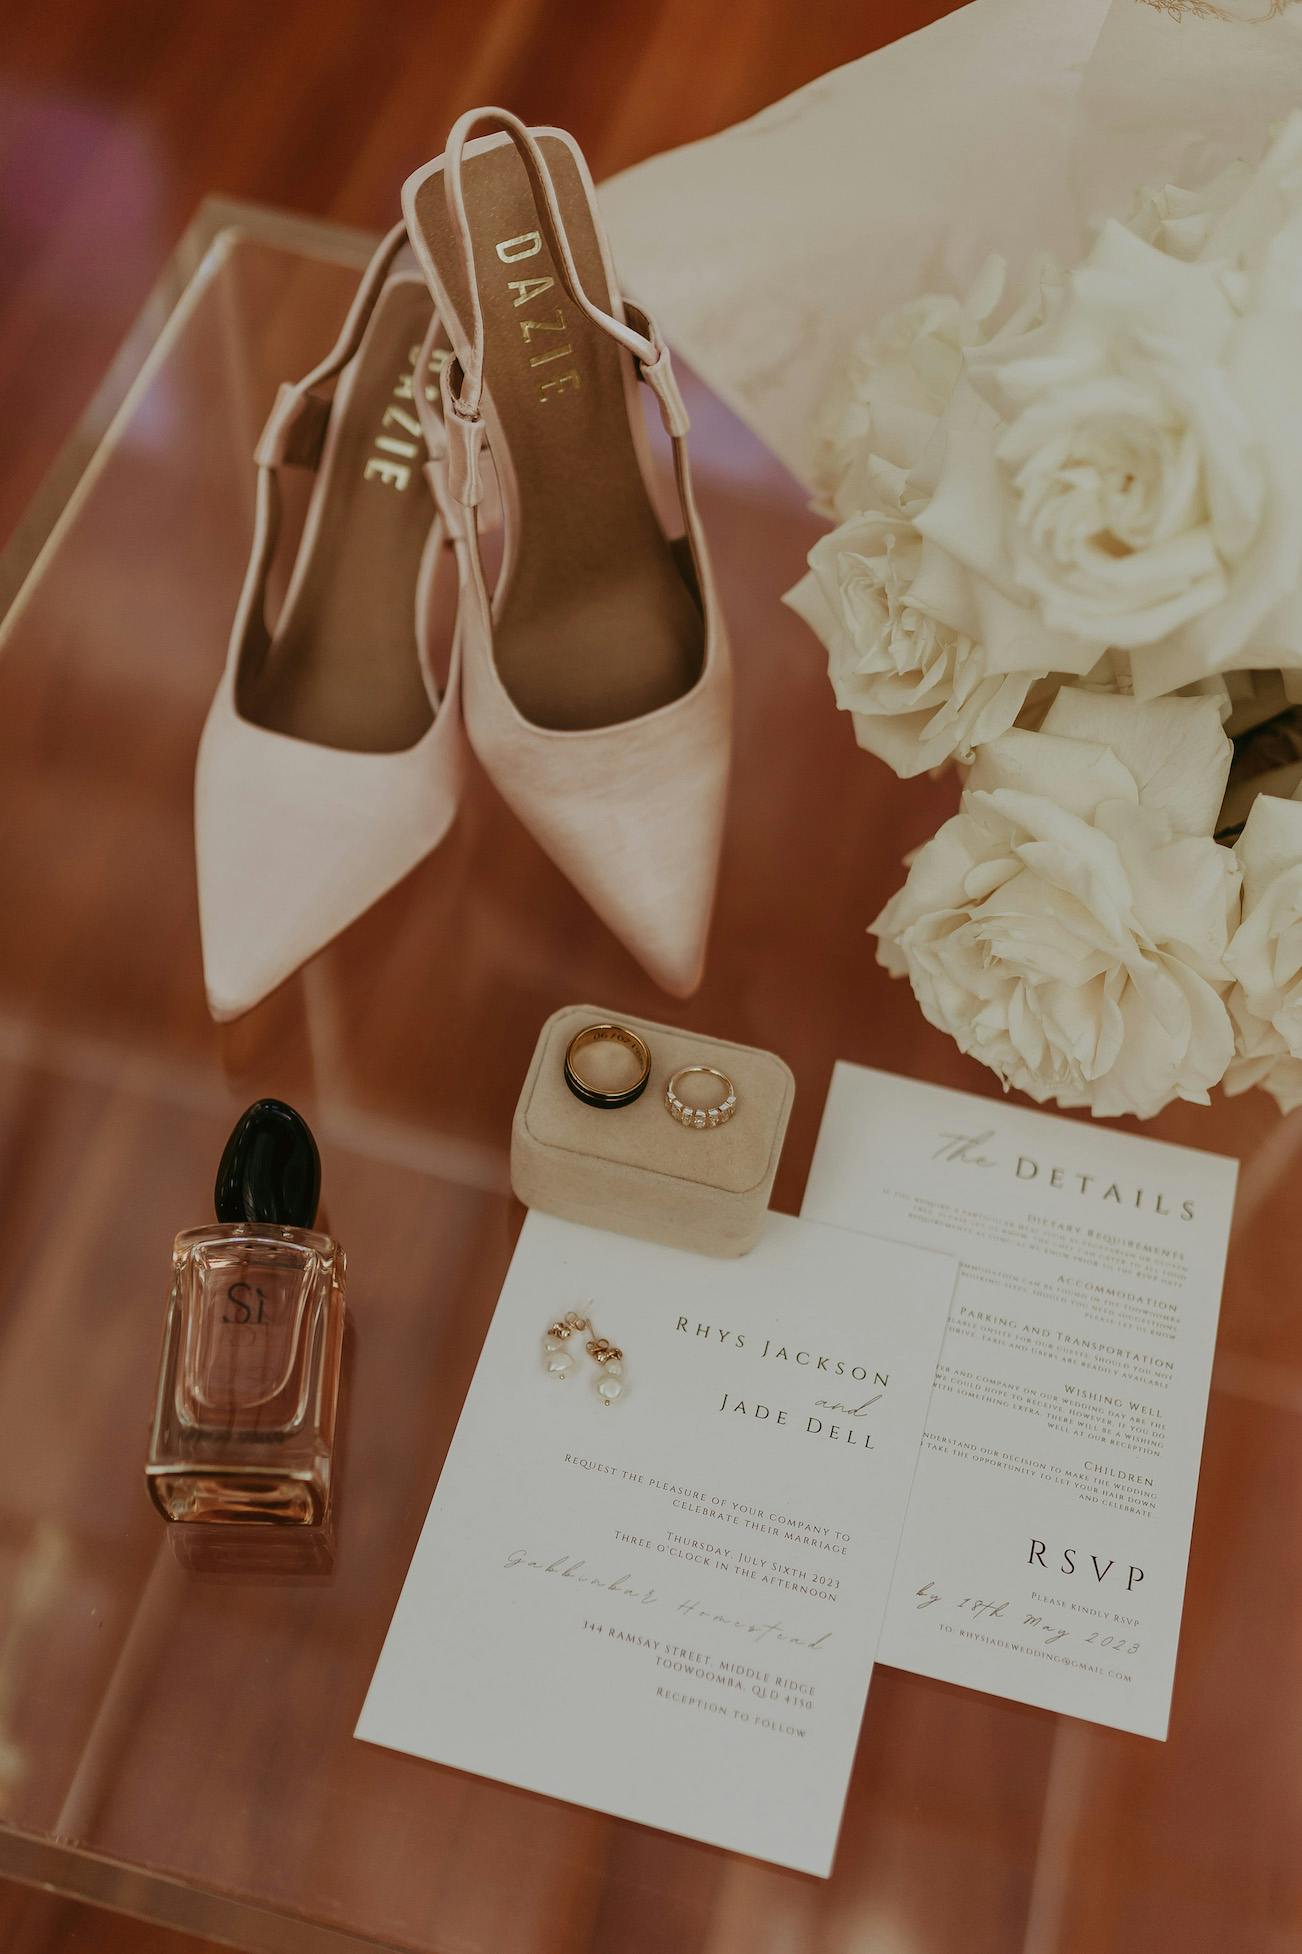 A wedding flat lay with blush pink high heels, gold rings, pearl earrings, a perfume bottle, and white roses. Also included are wedding details cards with RSVP information, featuring the names Rhys Jackson and Jade Dill.